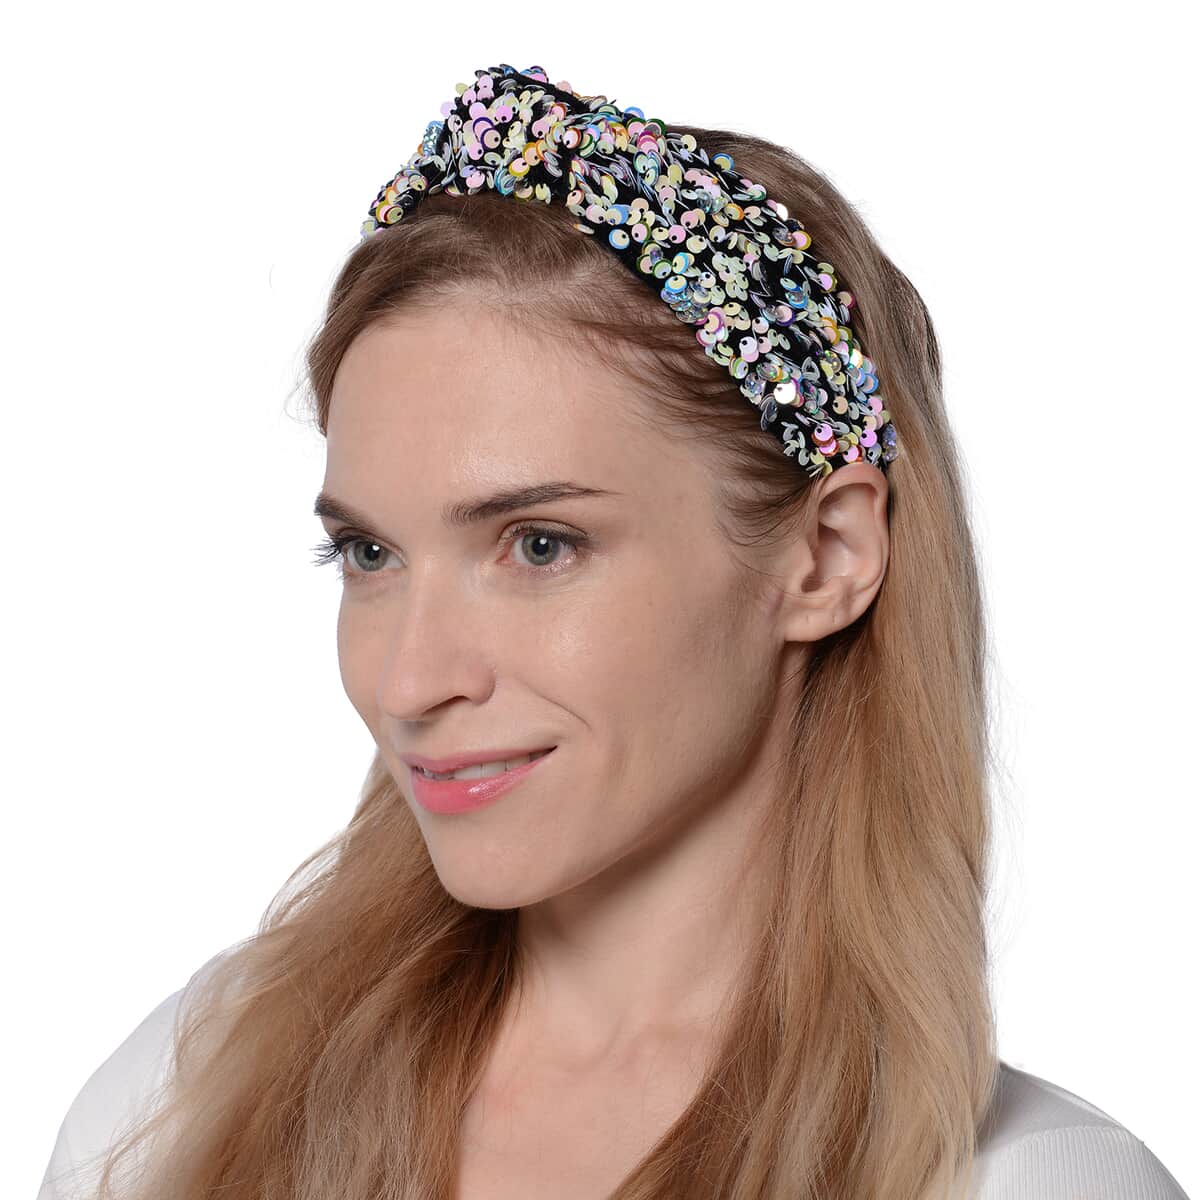 Set of 3 Multi Color Sparkly Wide-Brimmed Headband (5x6.2x1.5) image number 2